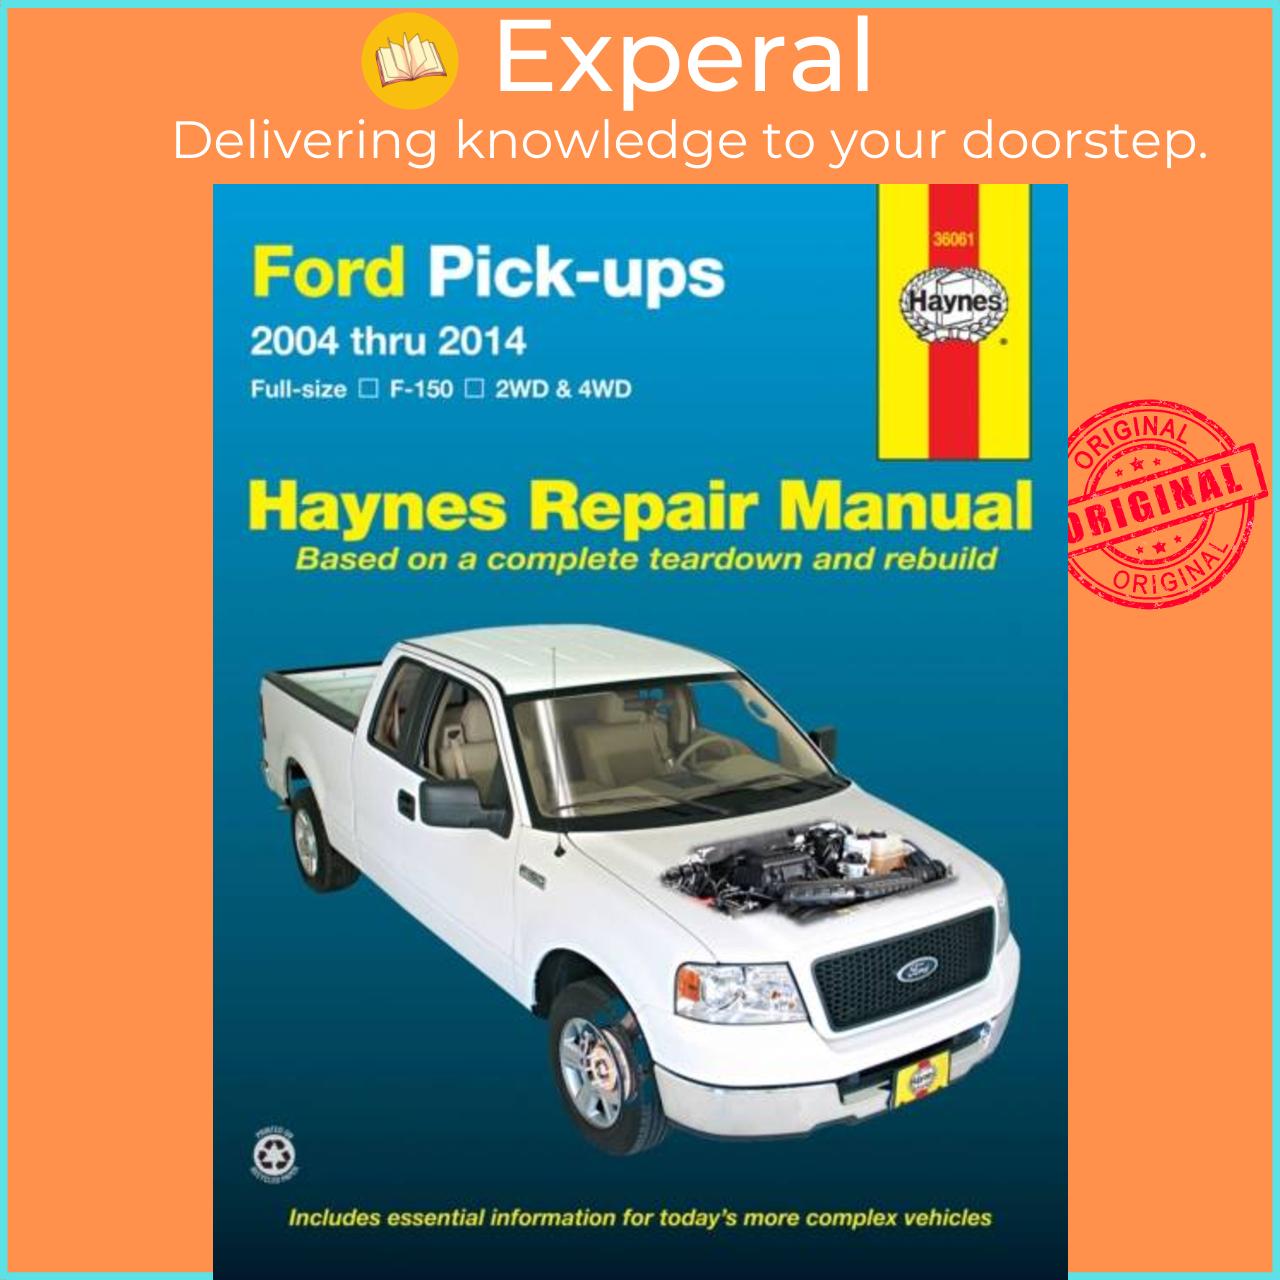 Sách - Ford full-size petrol pick-ups F-150 2WD & 4WD (2004-2014) Haynes Re by Haynes Publishing (UK edition, paperback)